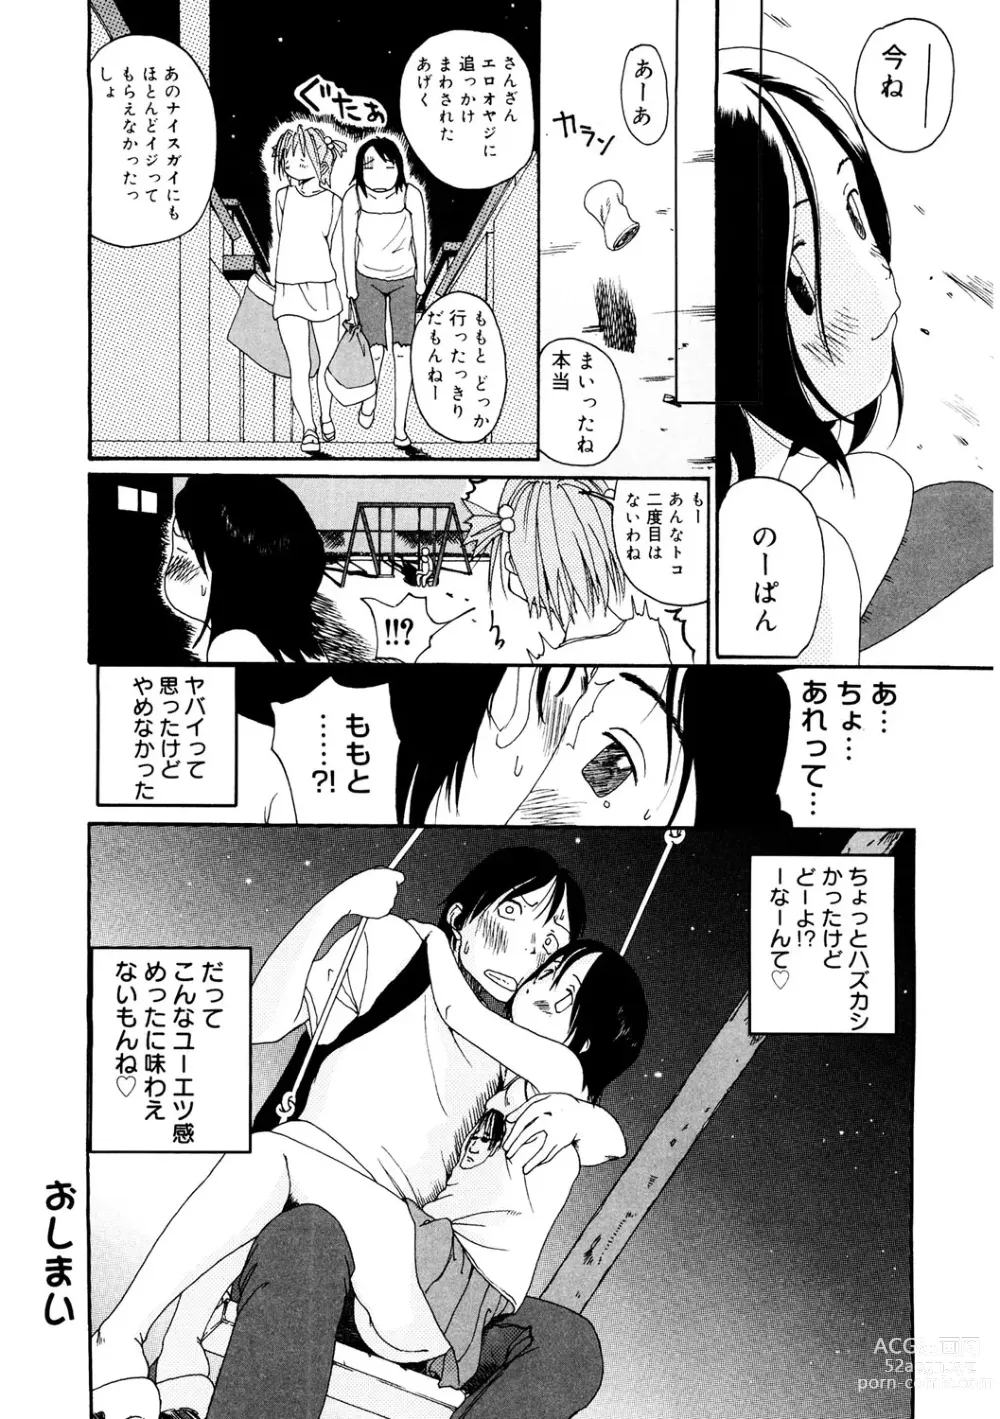 Page 196 of manga LQ -Little Queen- Vol. 52